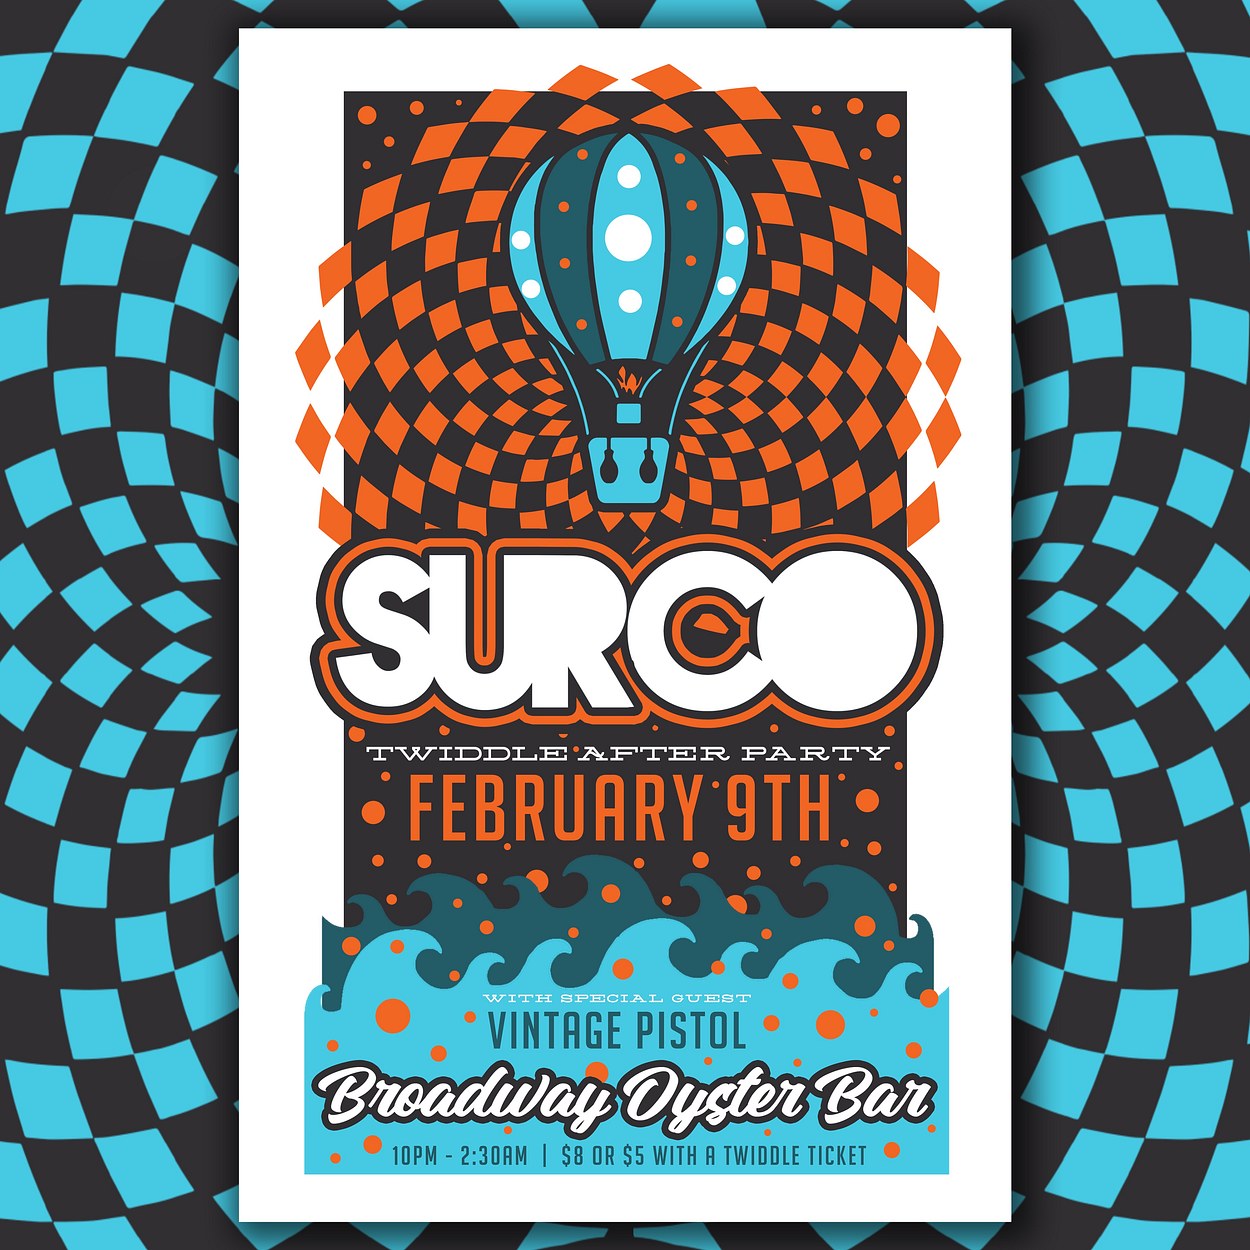 Surco - Twiddle Afterparty Show Poster